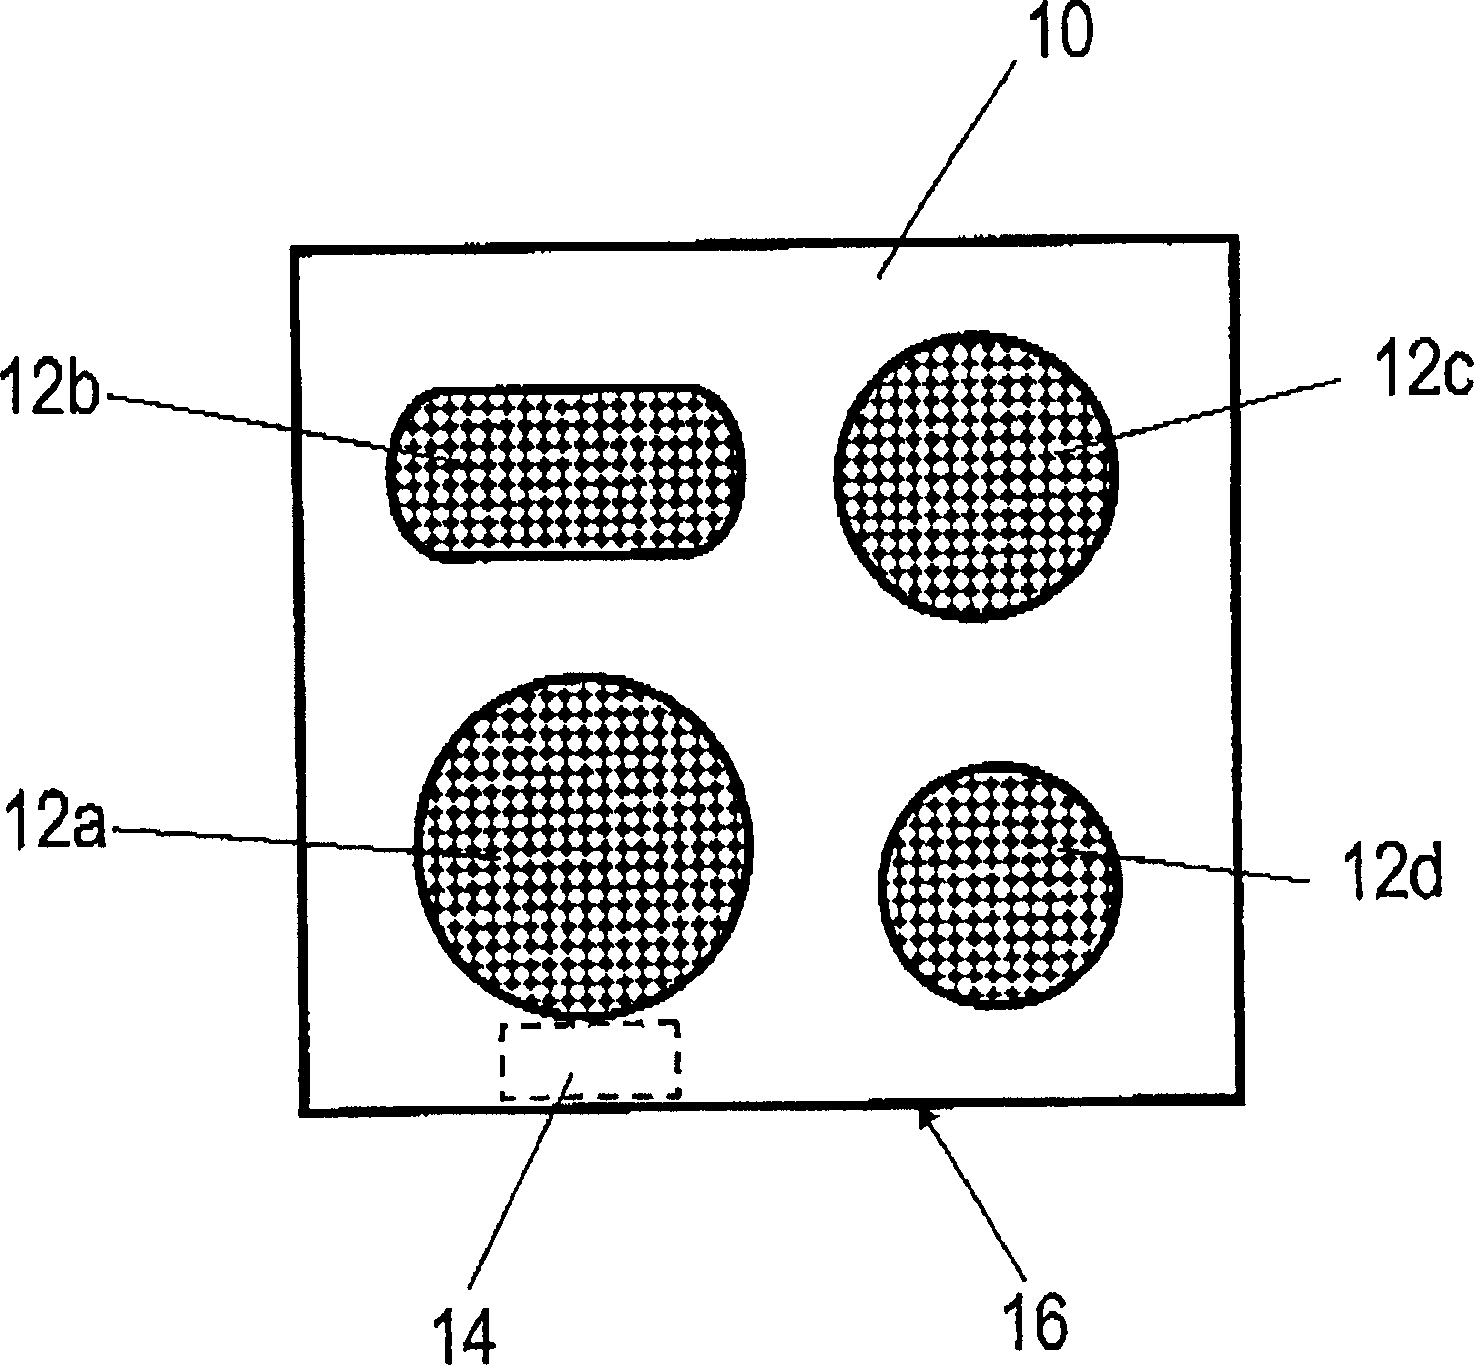 Method for monitoring the risk of damage in a cooking plate or glass plate